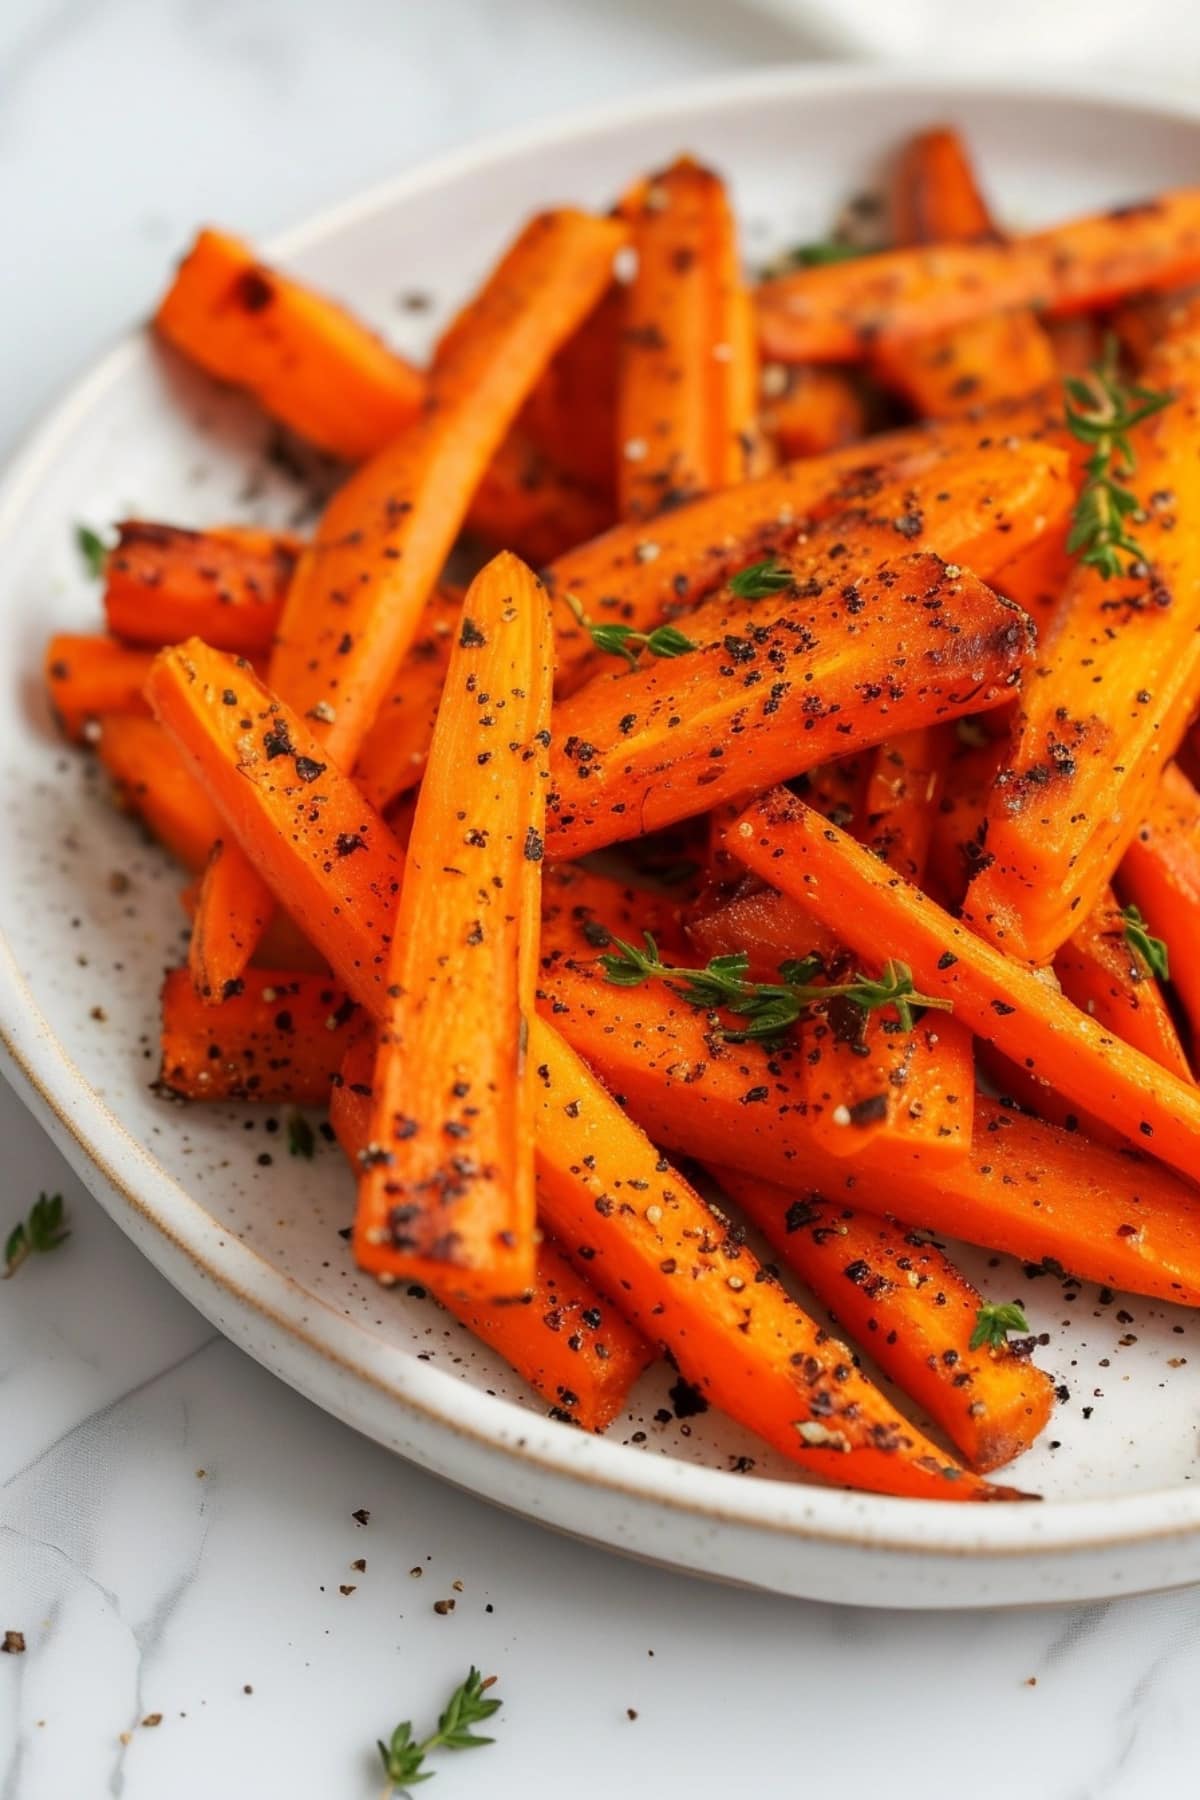 Carrots sticks served in white plate seasoned with pepper.